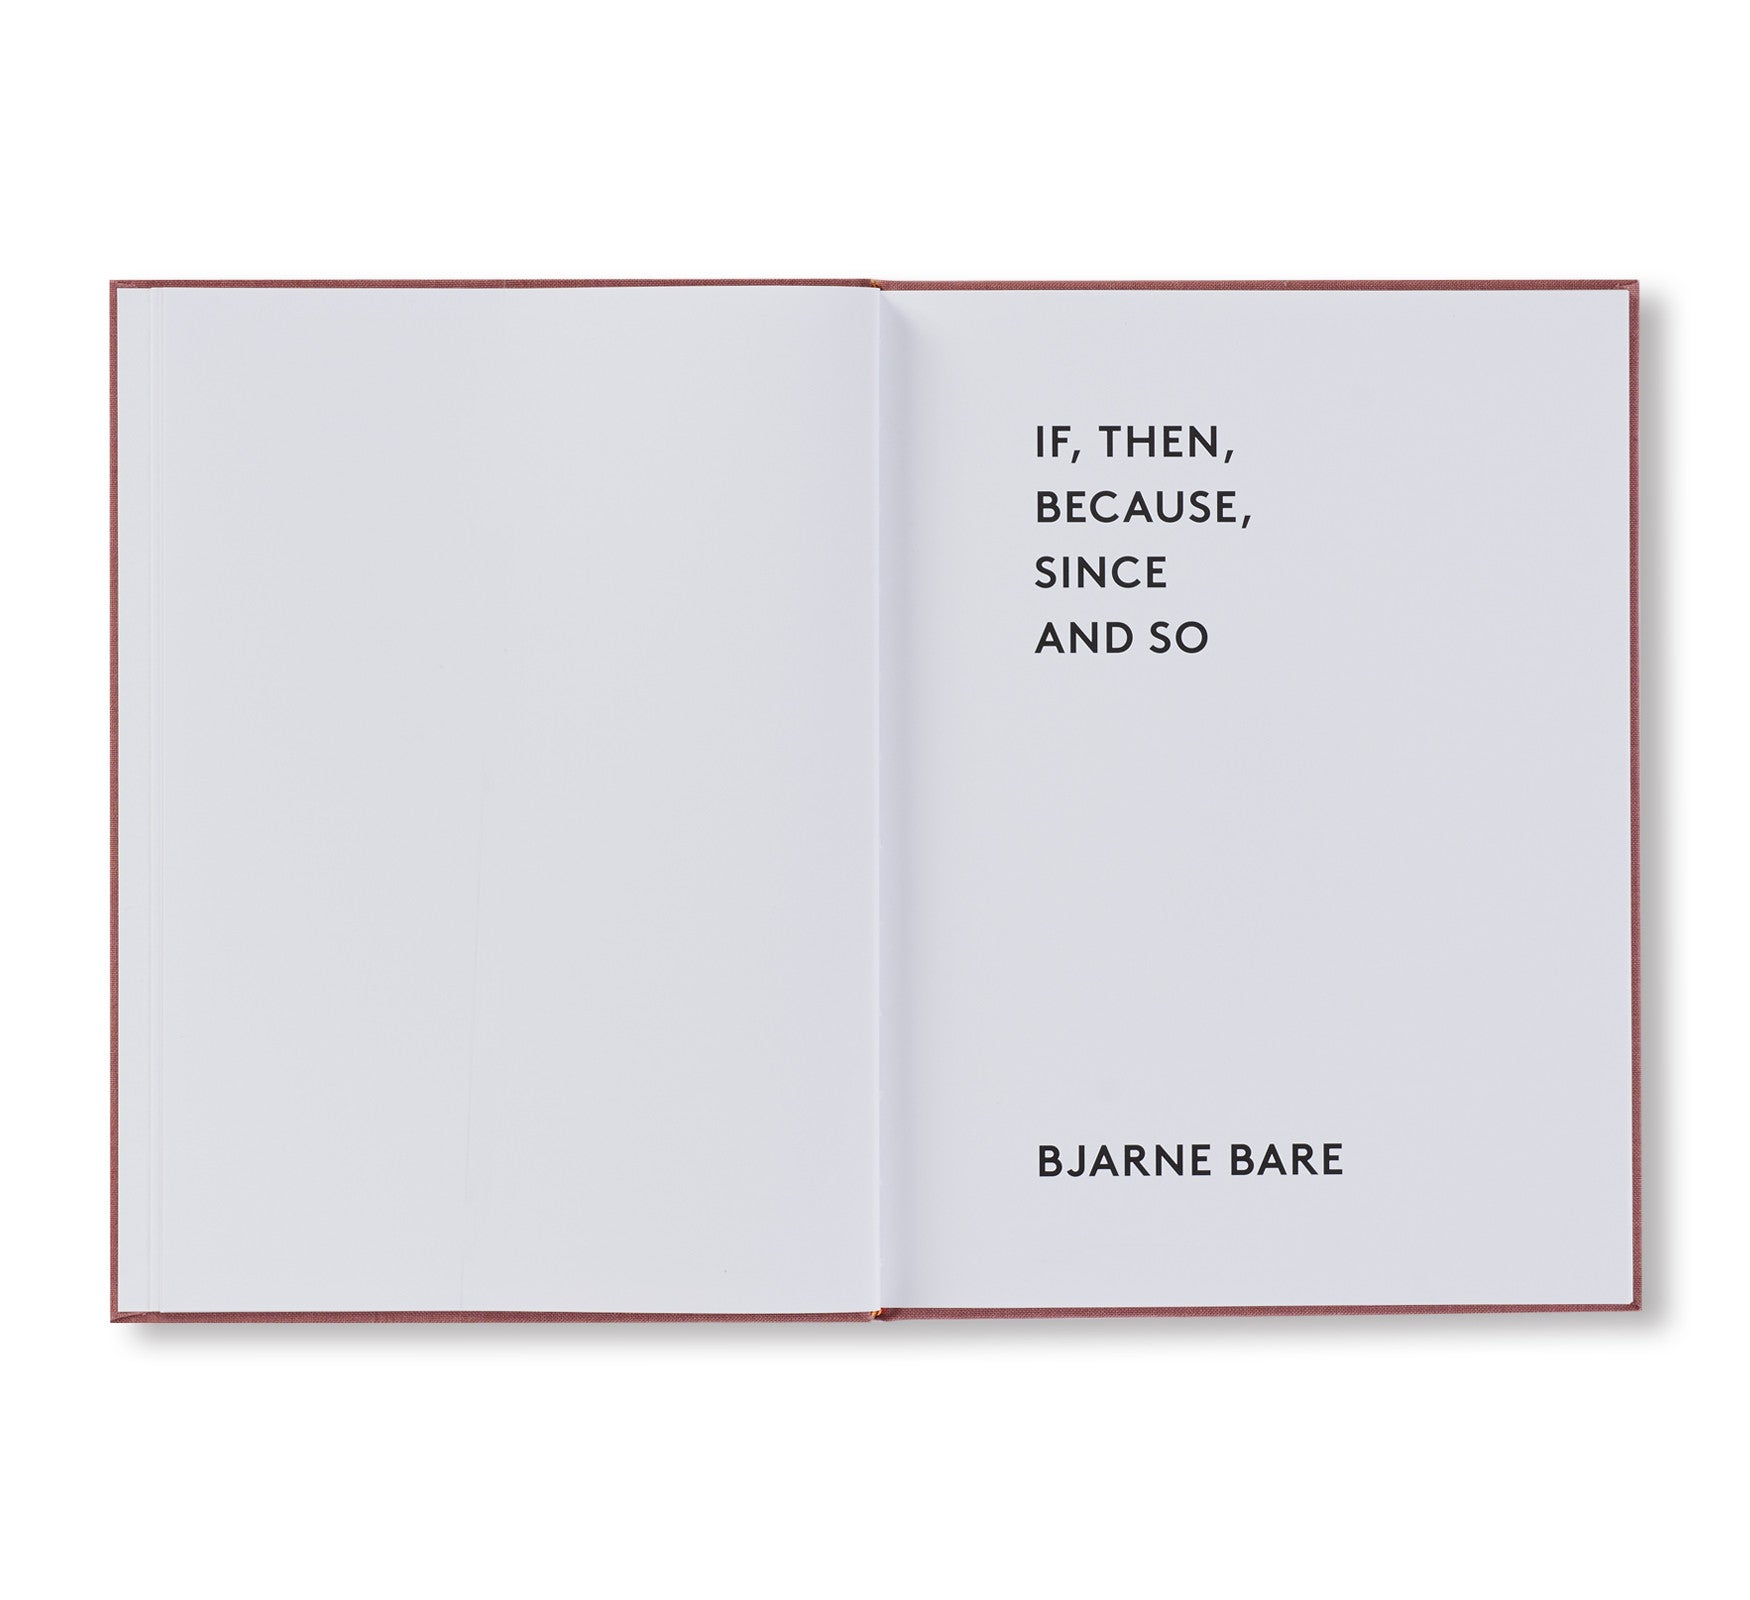 IF, THEN, BECAUSE, SINCE AND SO by Bjarne Bare